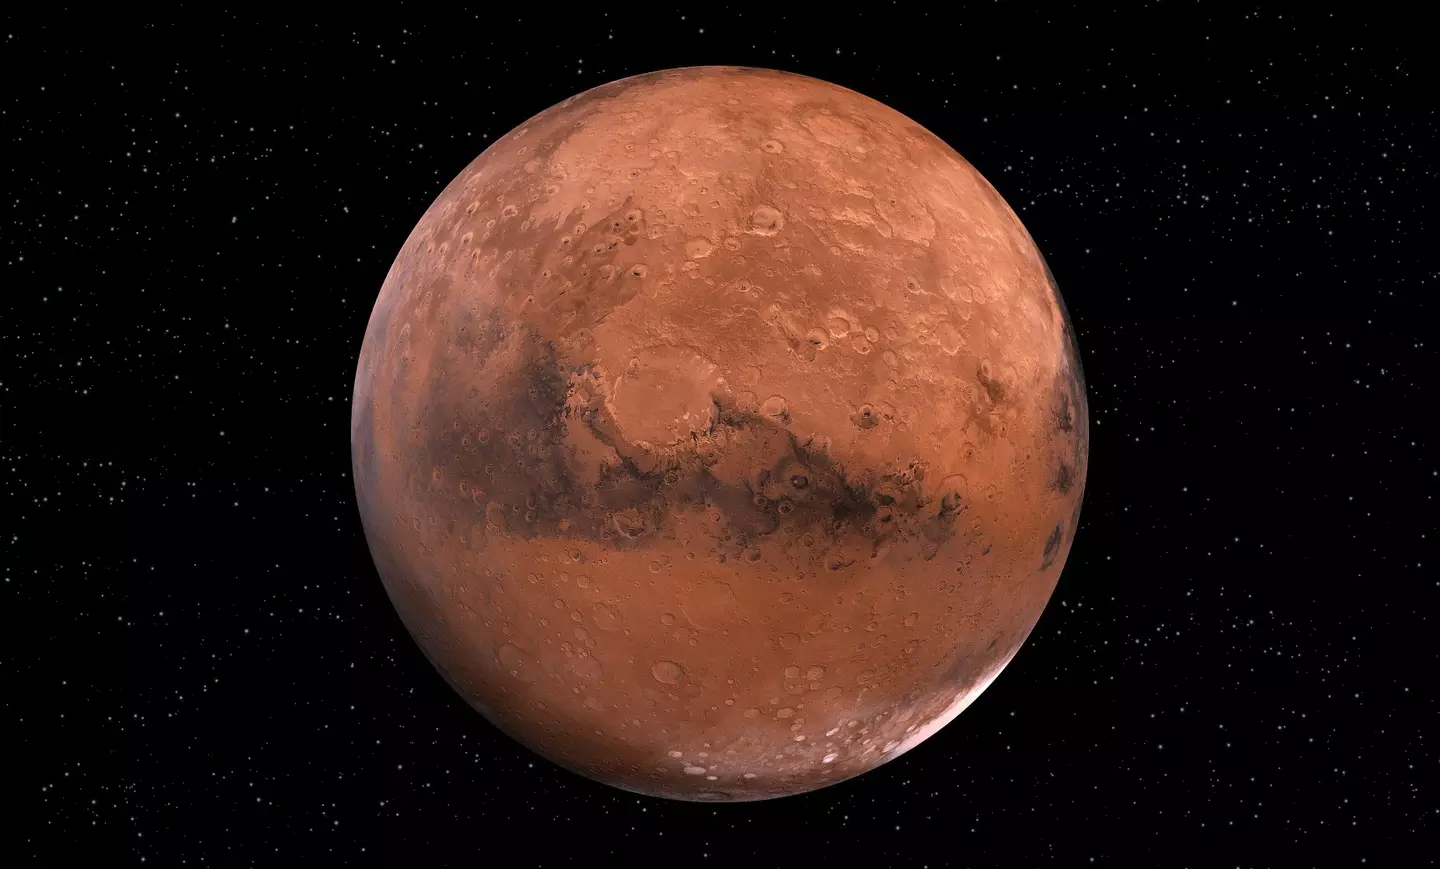 The Red Planet.